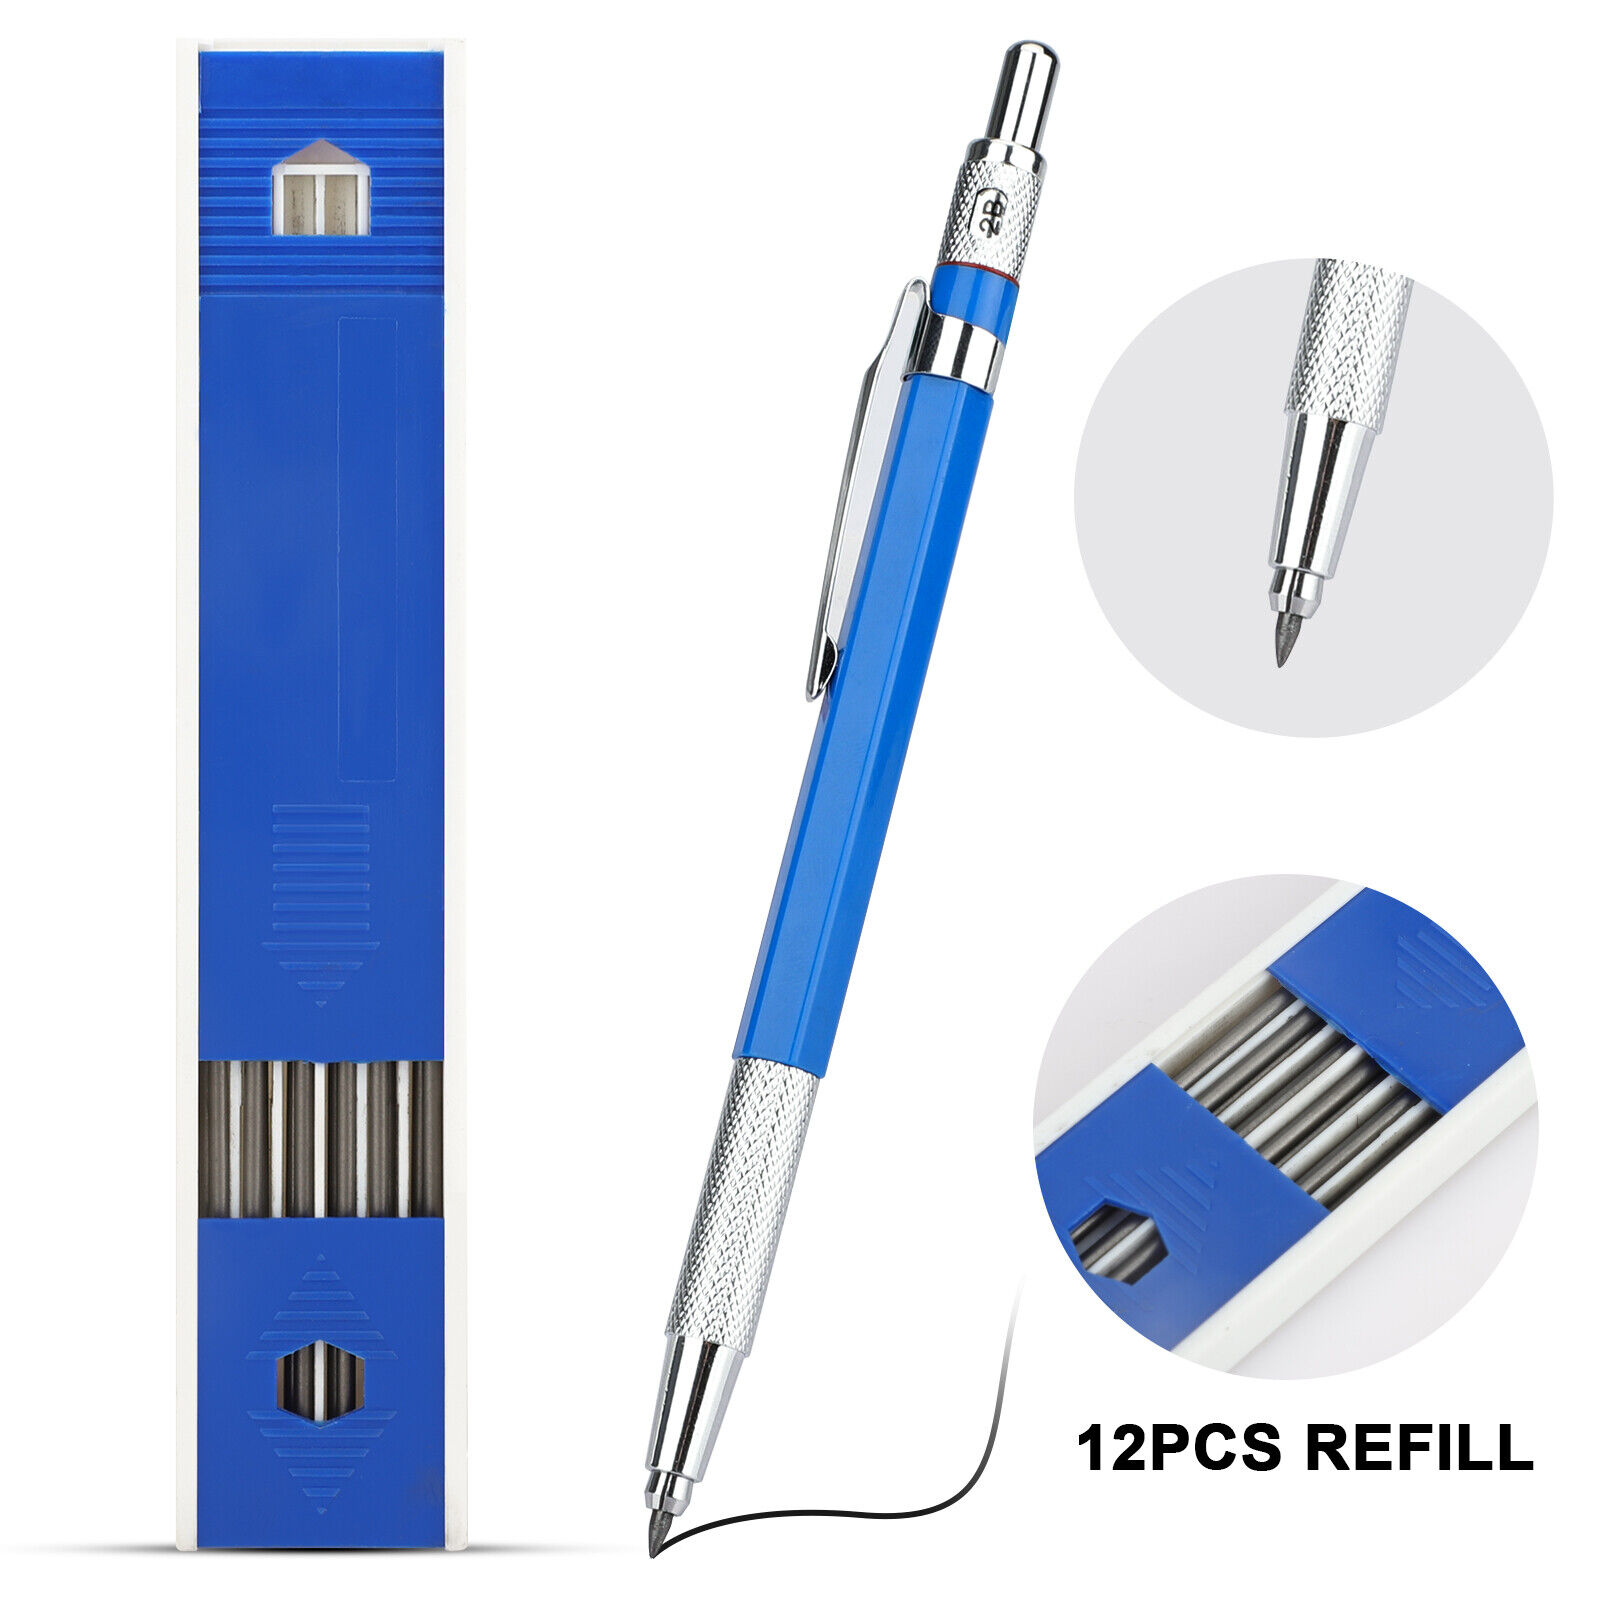 2.0mm Mechanical Drafting Clutch Pencil +12pcs Refill Lead for Sketching Drawing